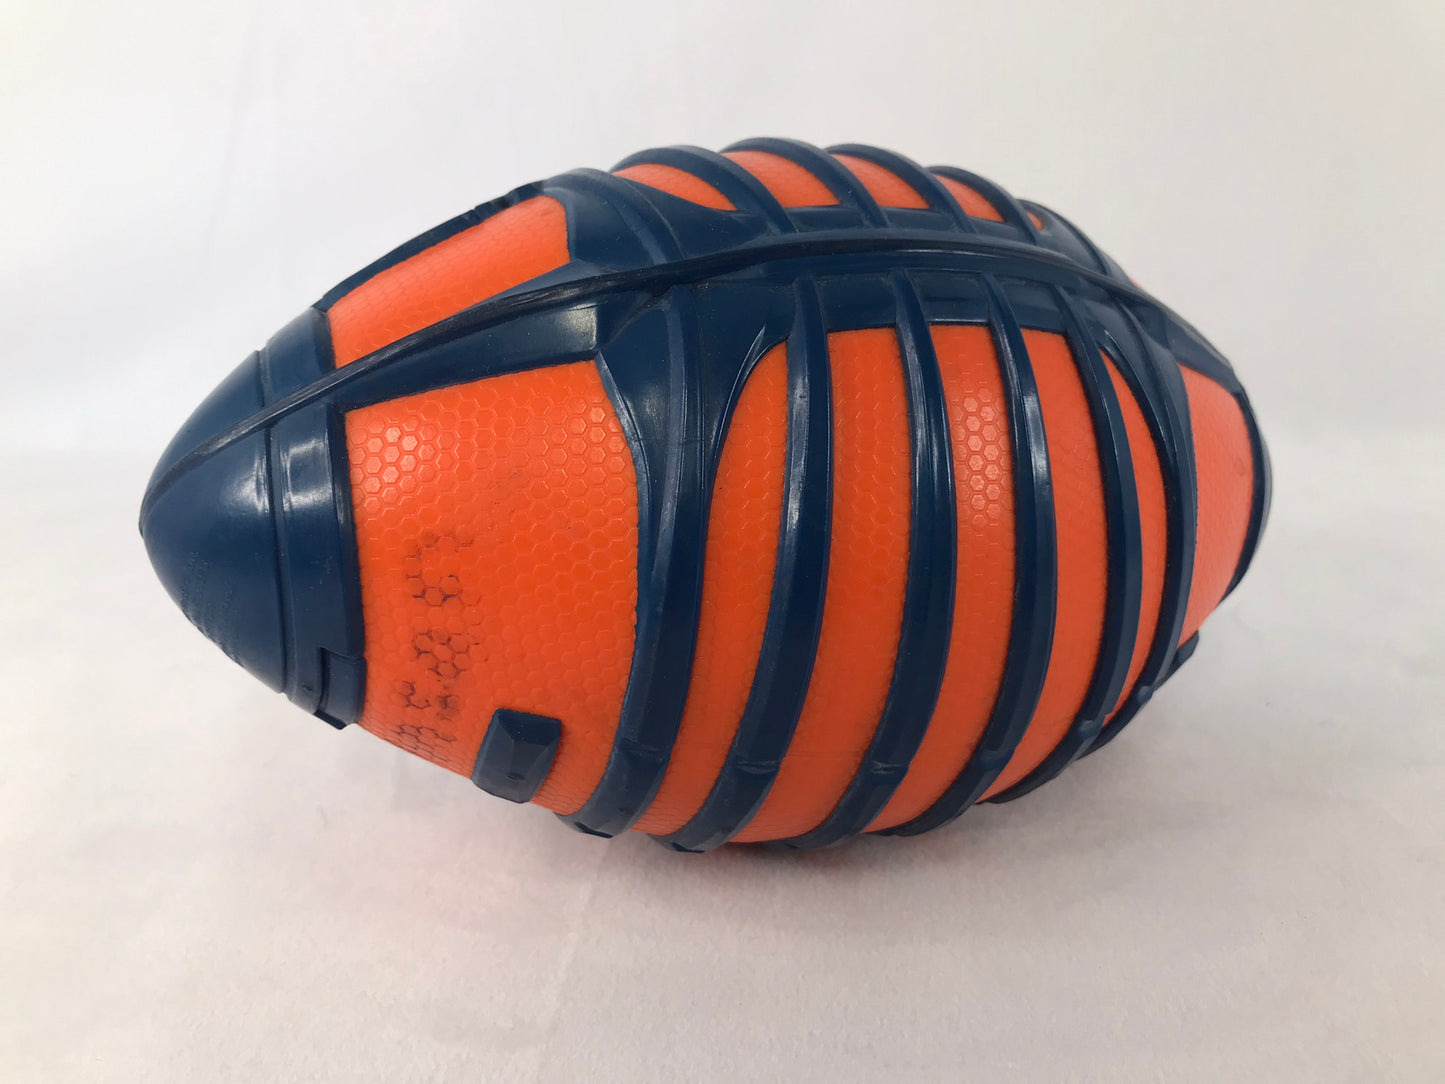 Nerf Football Outdoor Toys 10 inch Child Youth Size